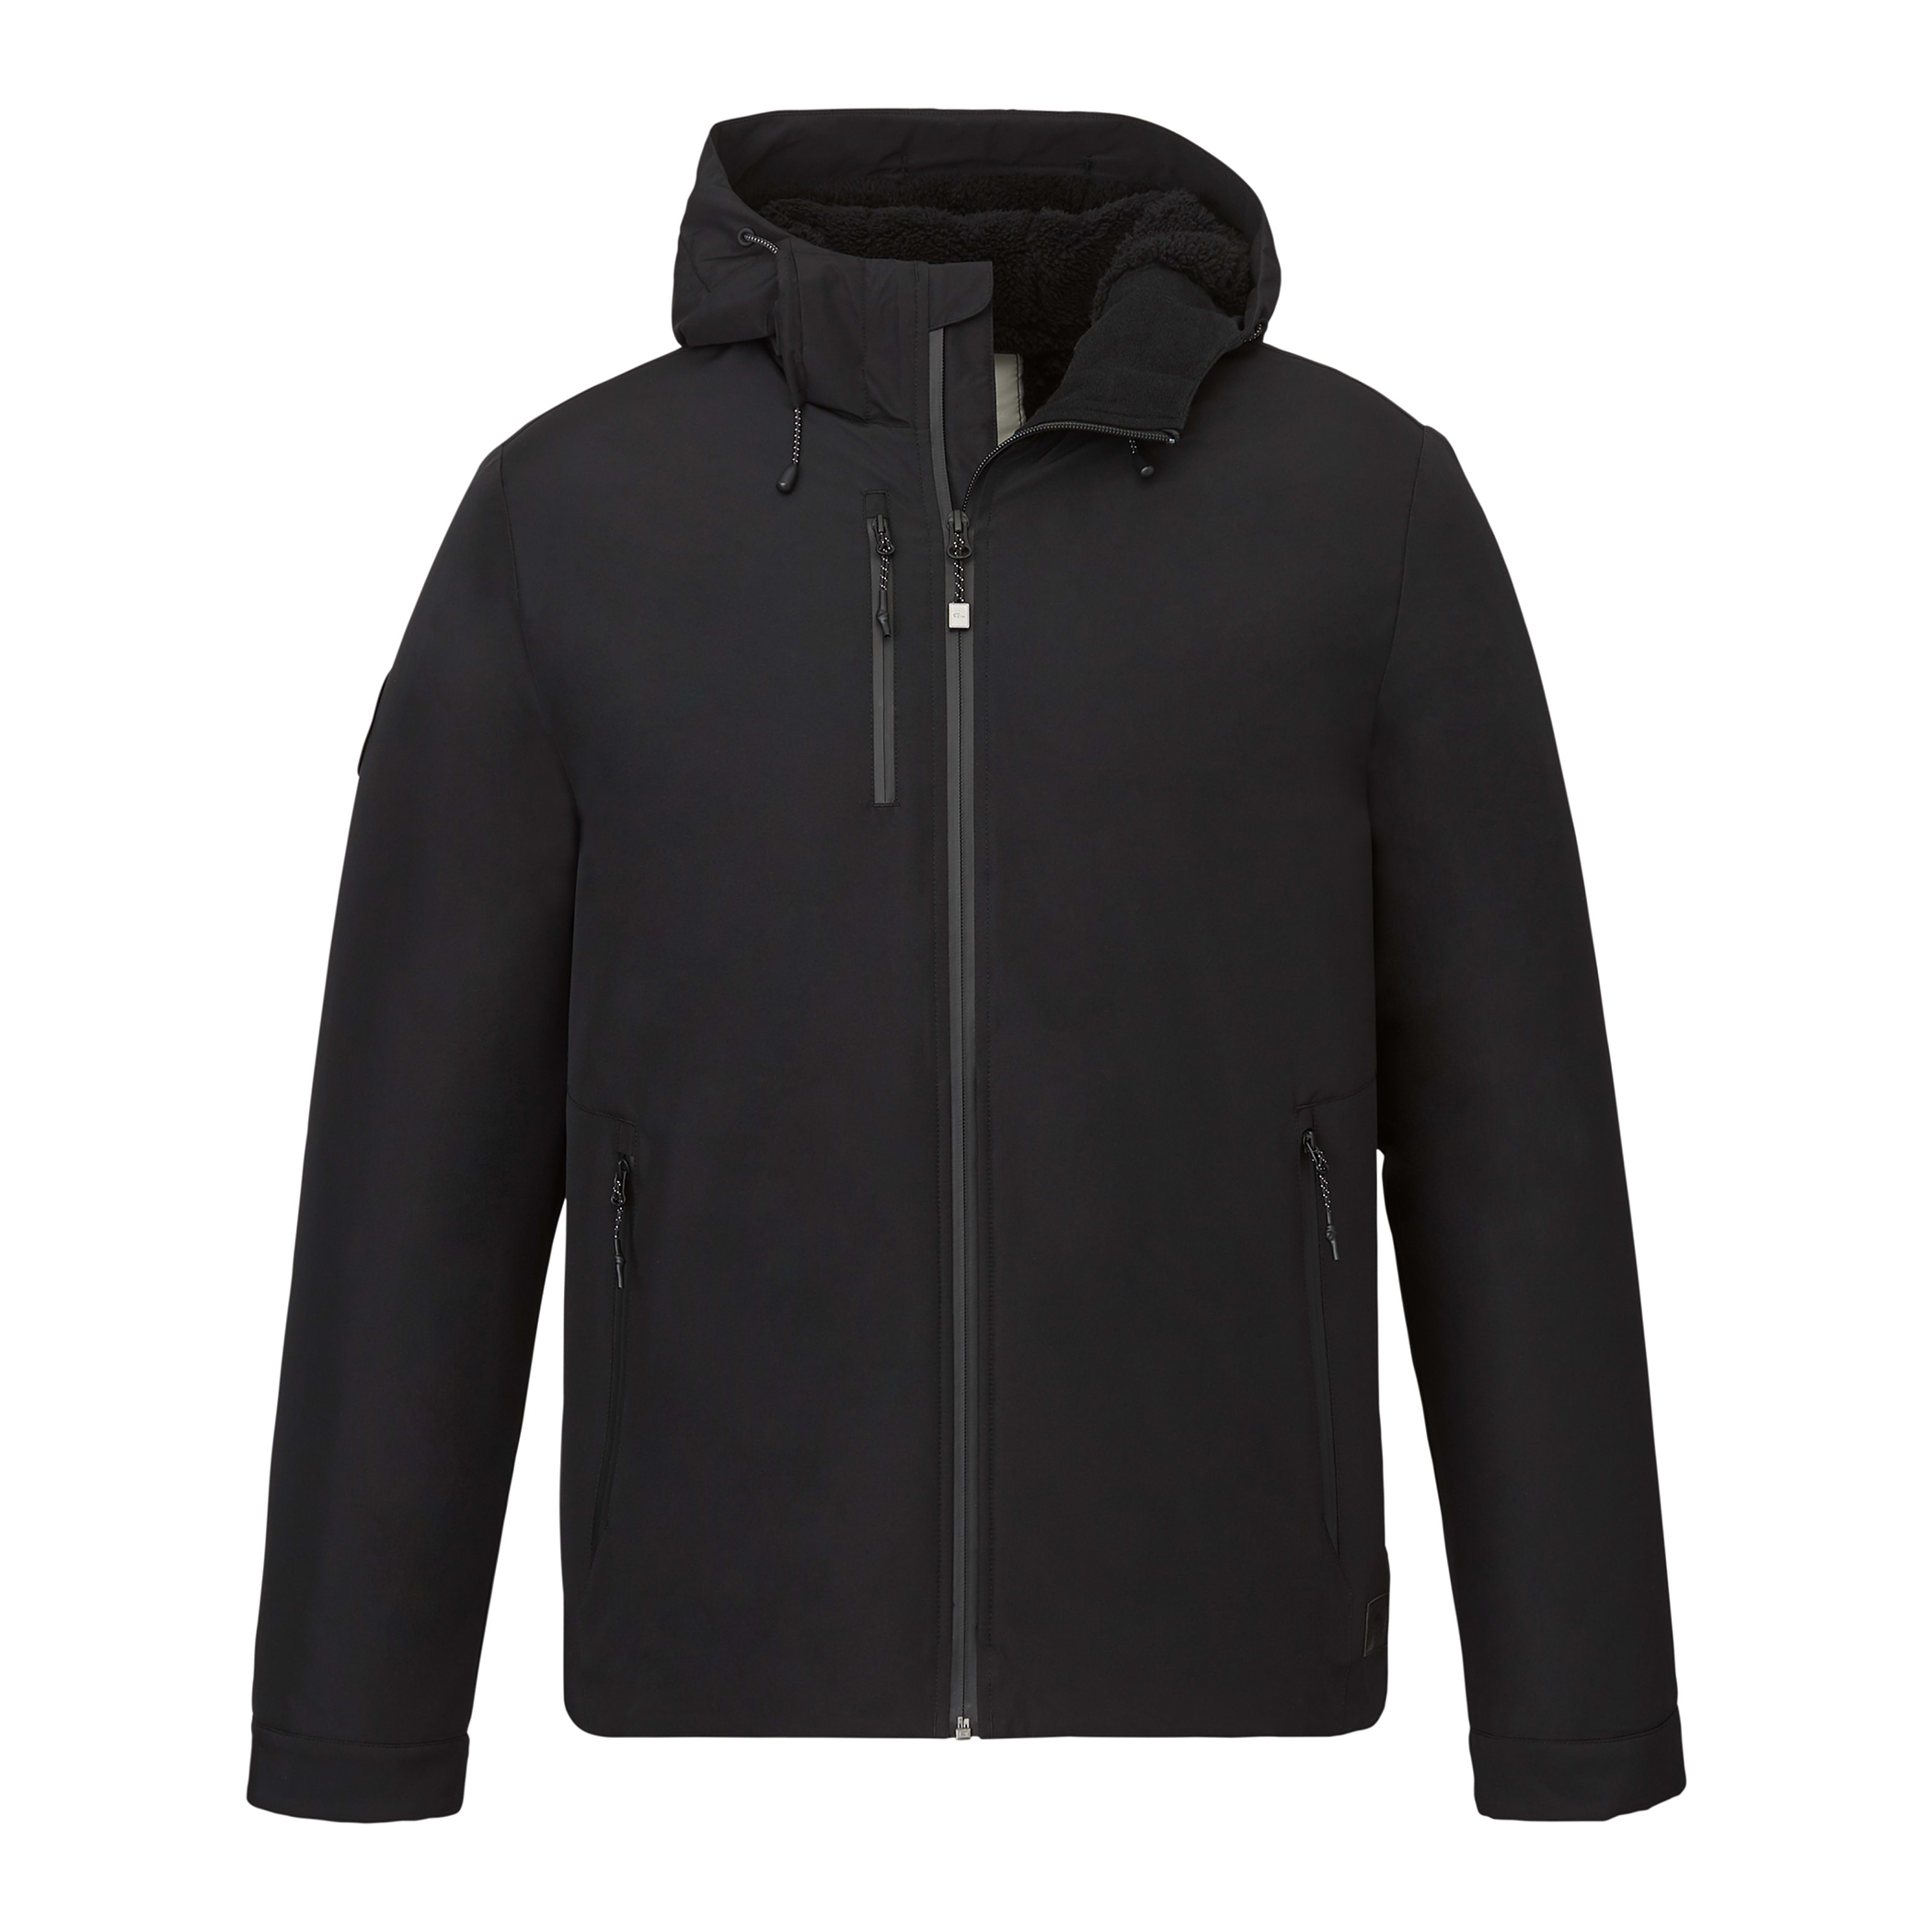 Roots73 ROCKGLEN Eco Insulated | Trimark Sportswear